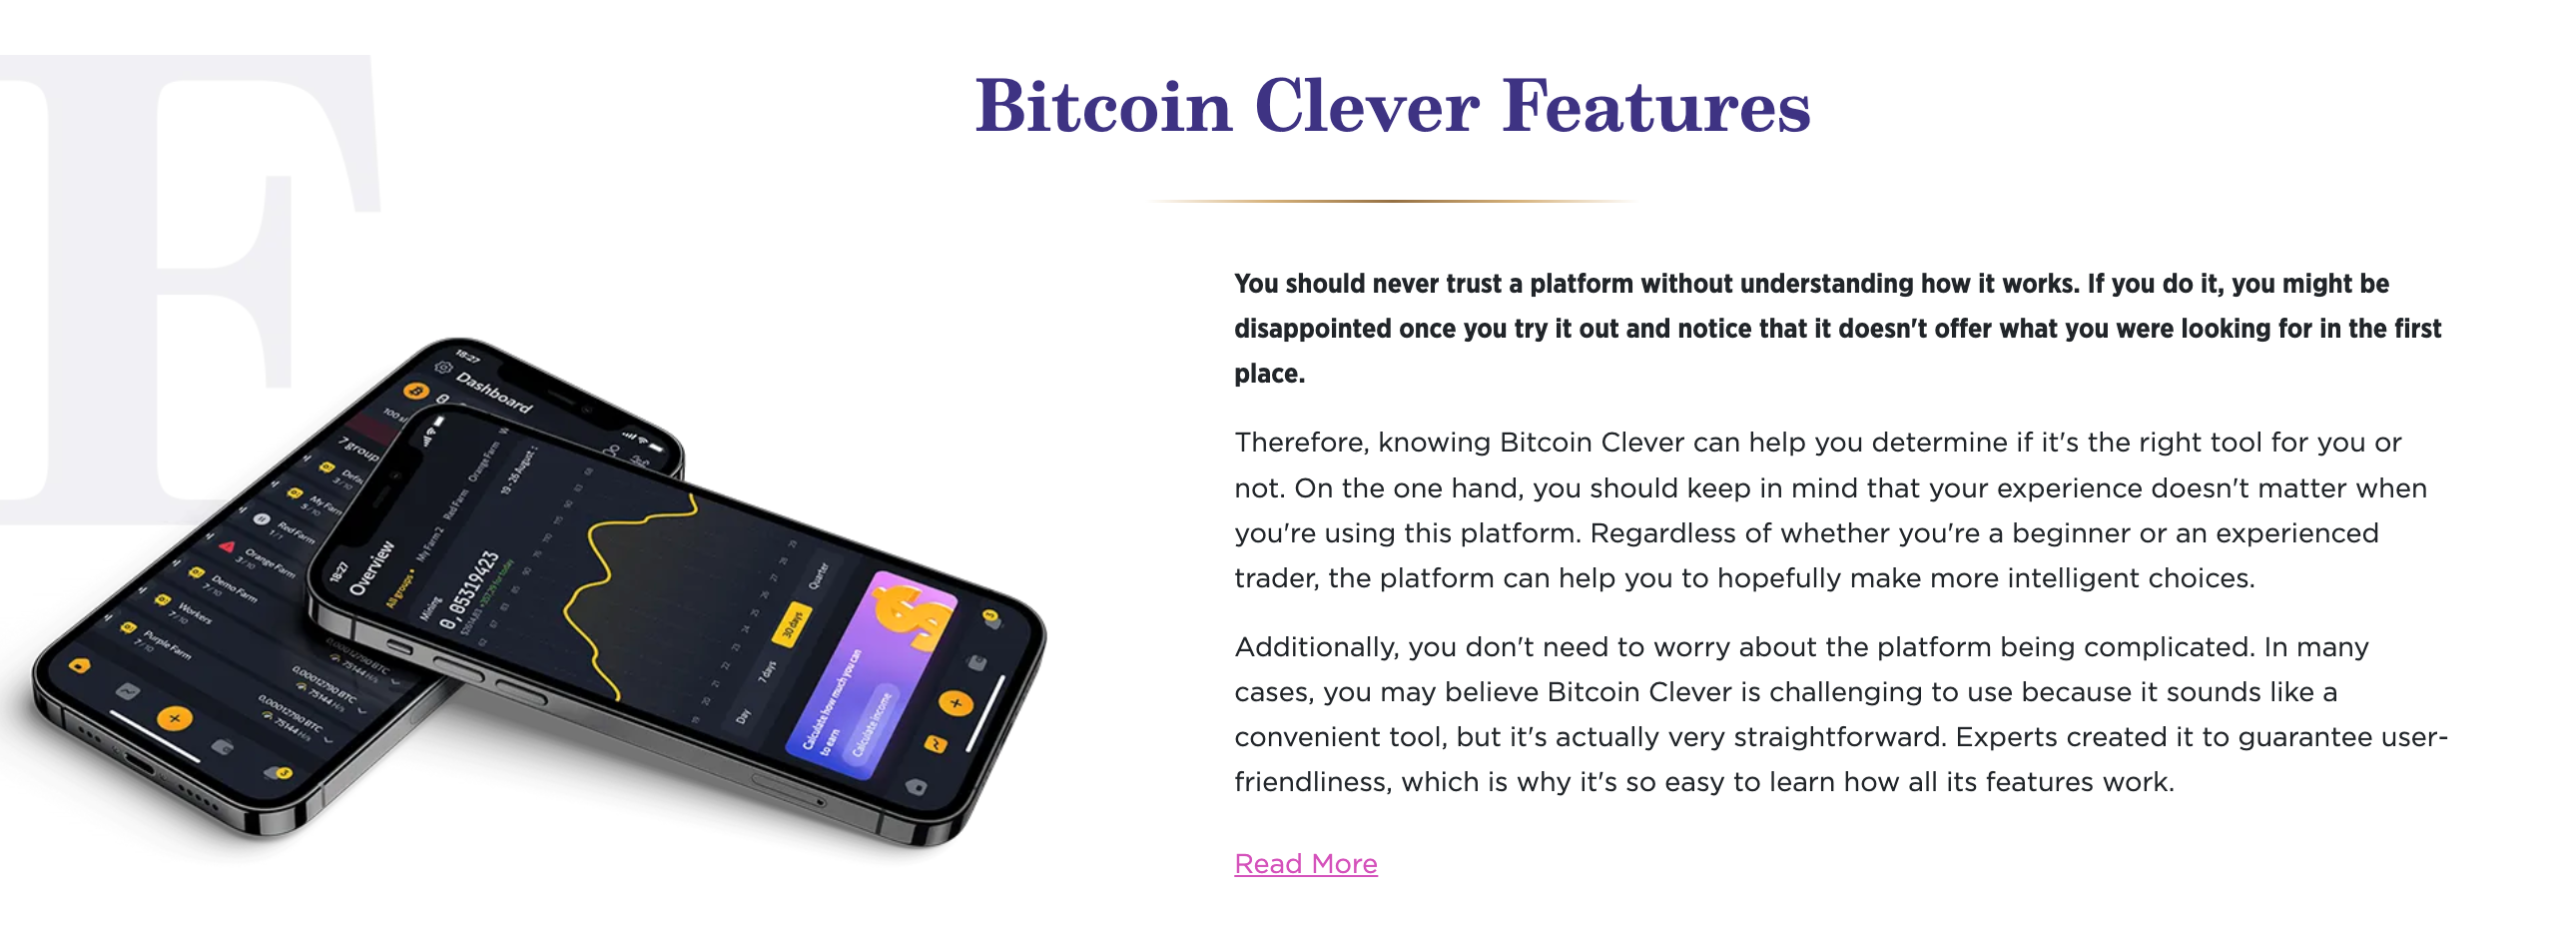 Bitcoin Clever